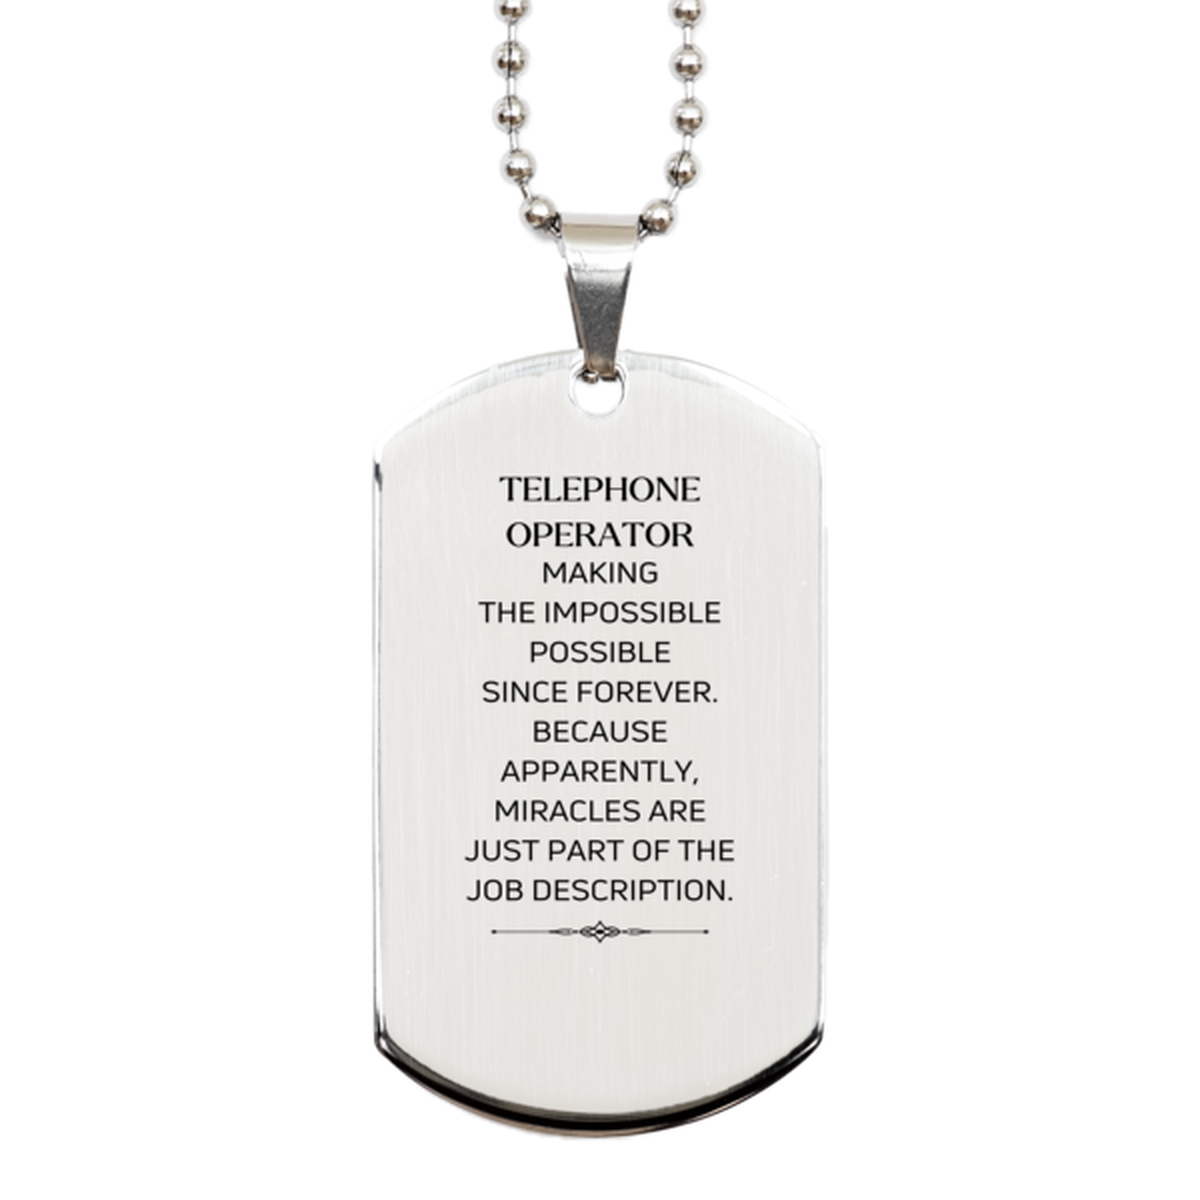 Funny Telephone Operator Gifts, Miracles are just part of the job description, Inspirational Birthday Silver Dog Tag For Telephone Operator, Men, Women, Coworkers, Friends, Boss